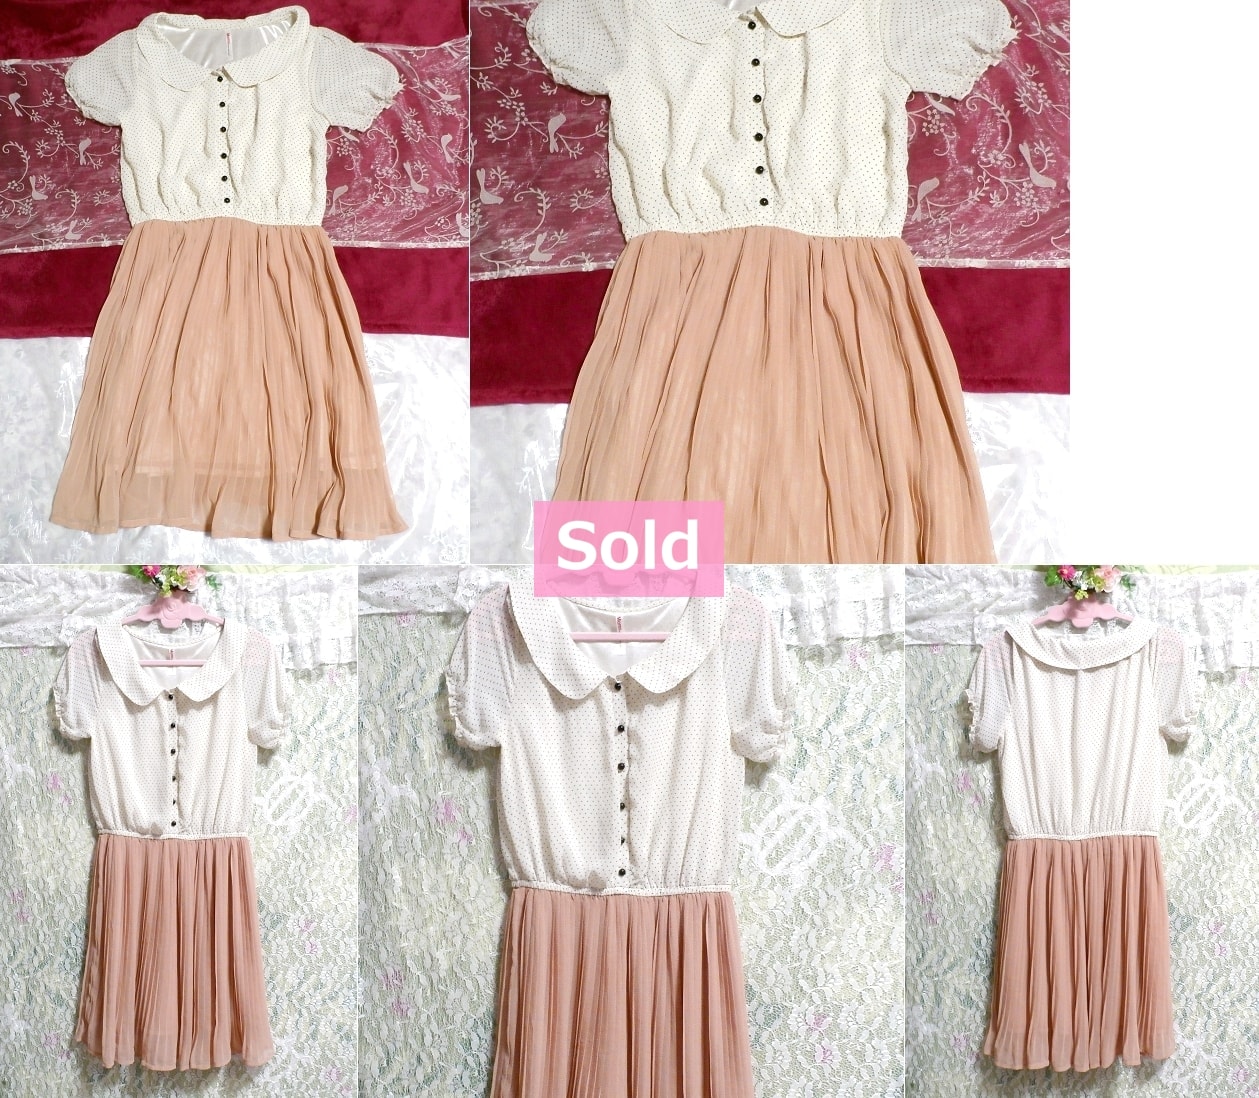 White water ball pattern blouse tops pink tulle skirt one piece, dress & knee length skirt & M size